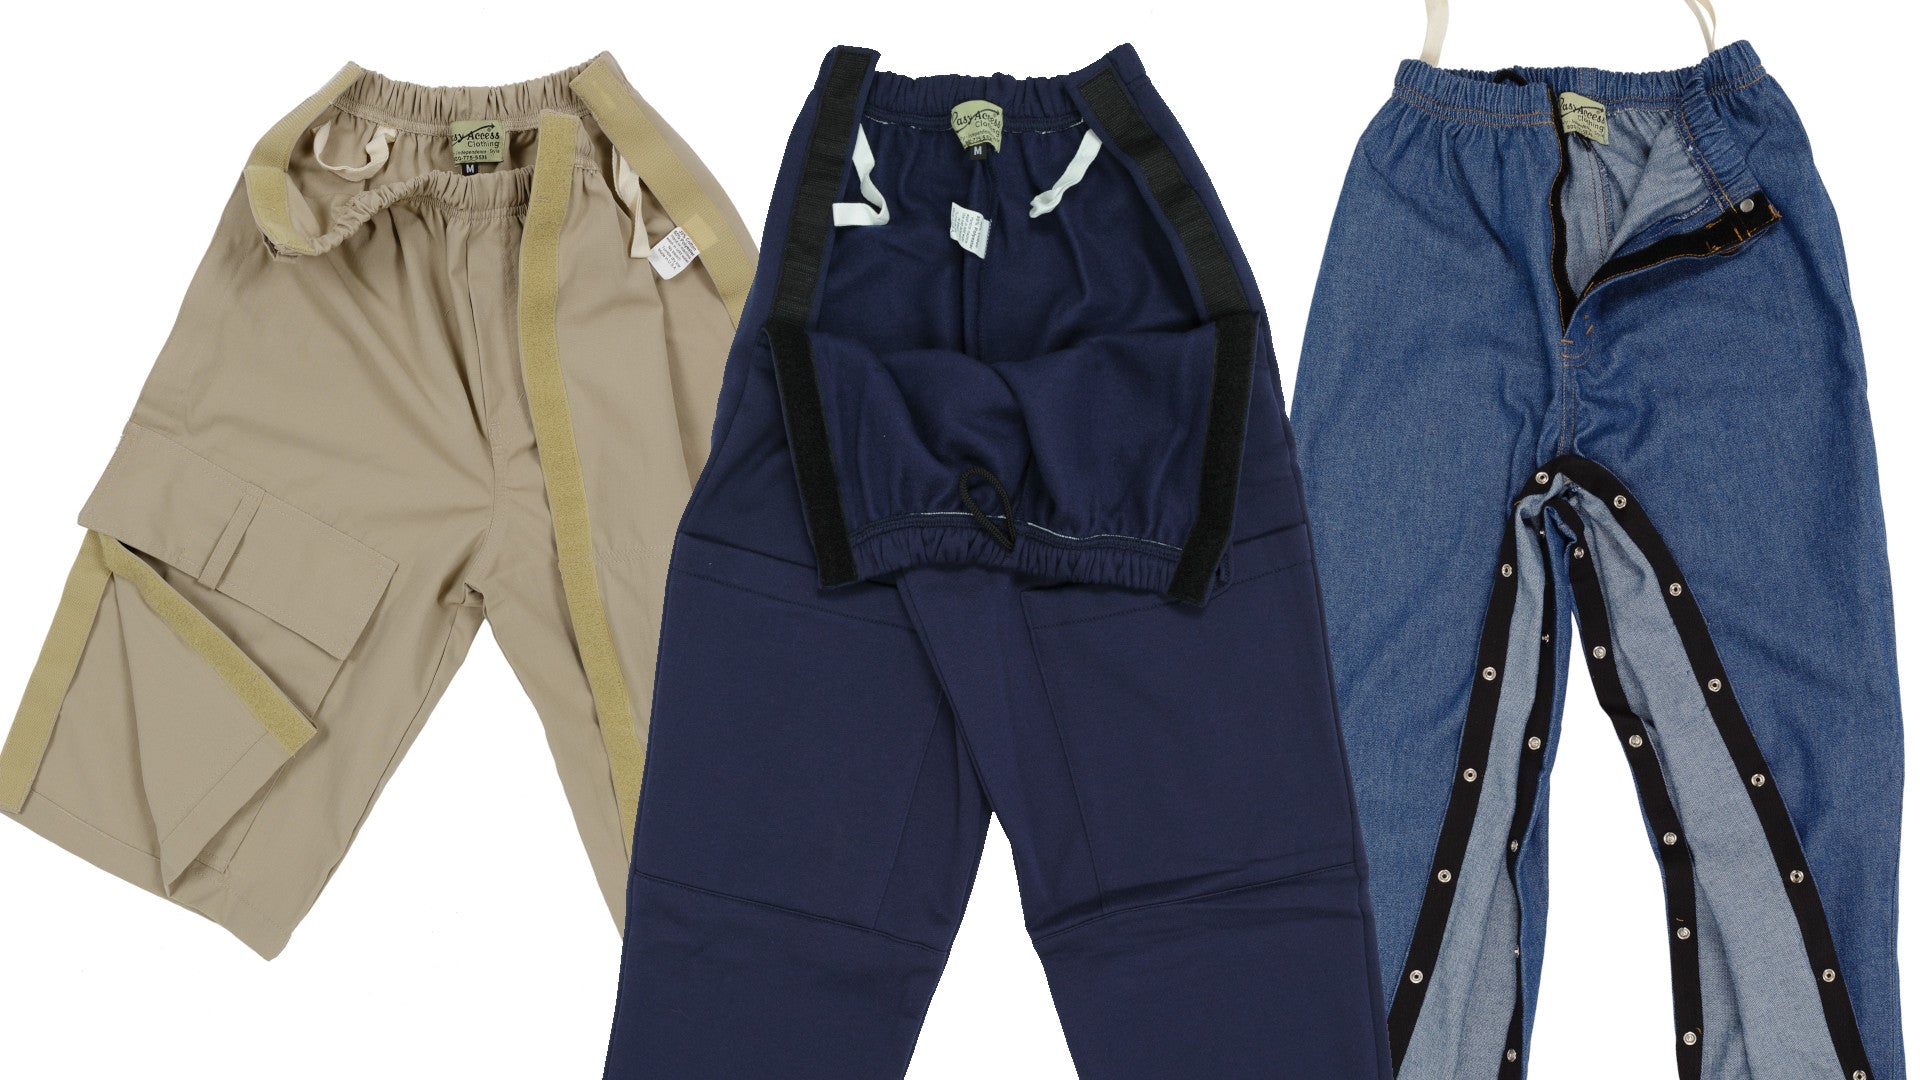 ZipOns: Adapted Trousers To Help You Dress Easier And Be Freer